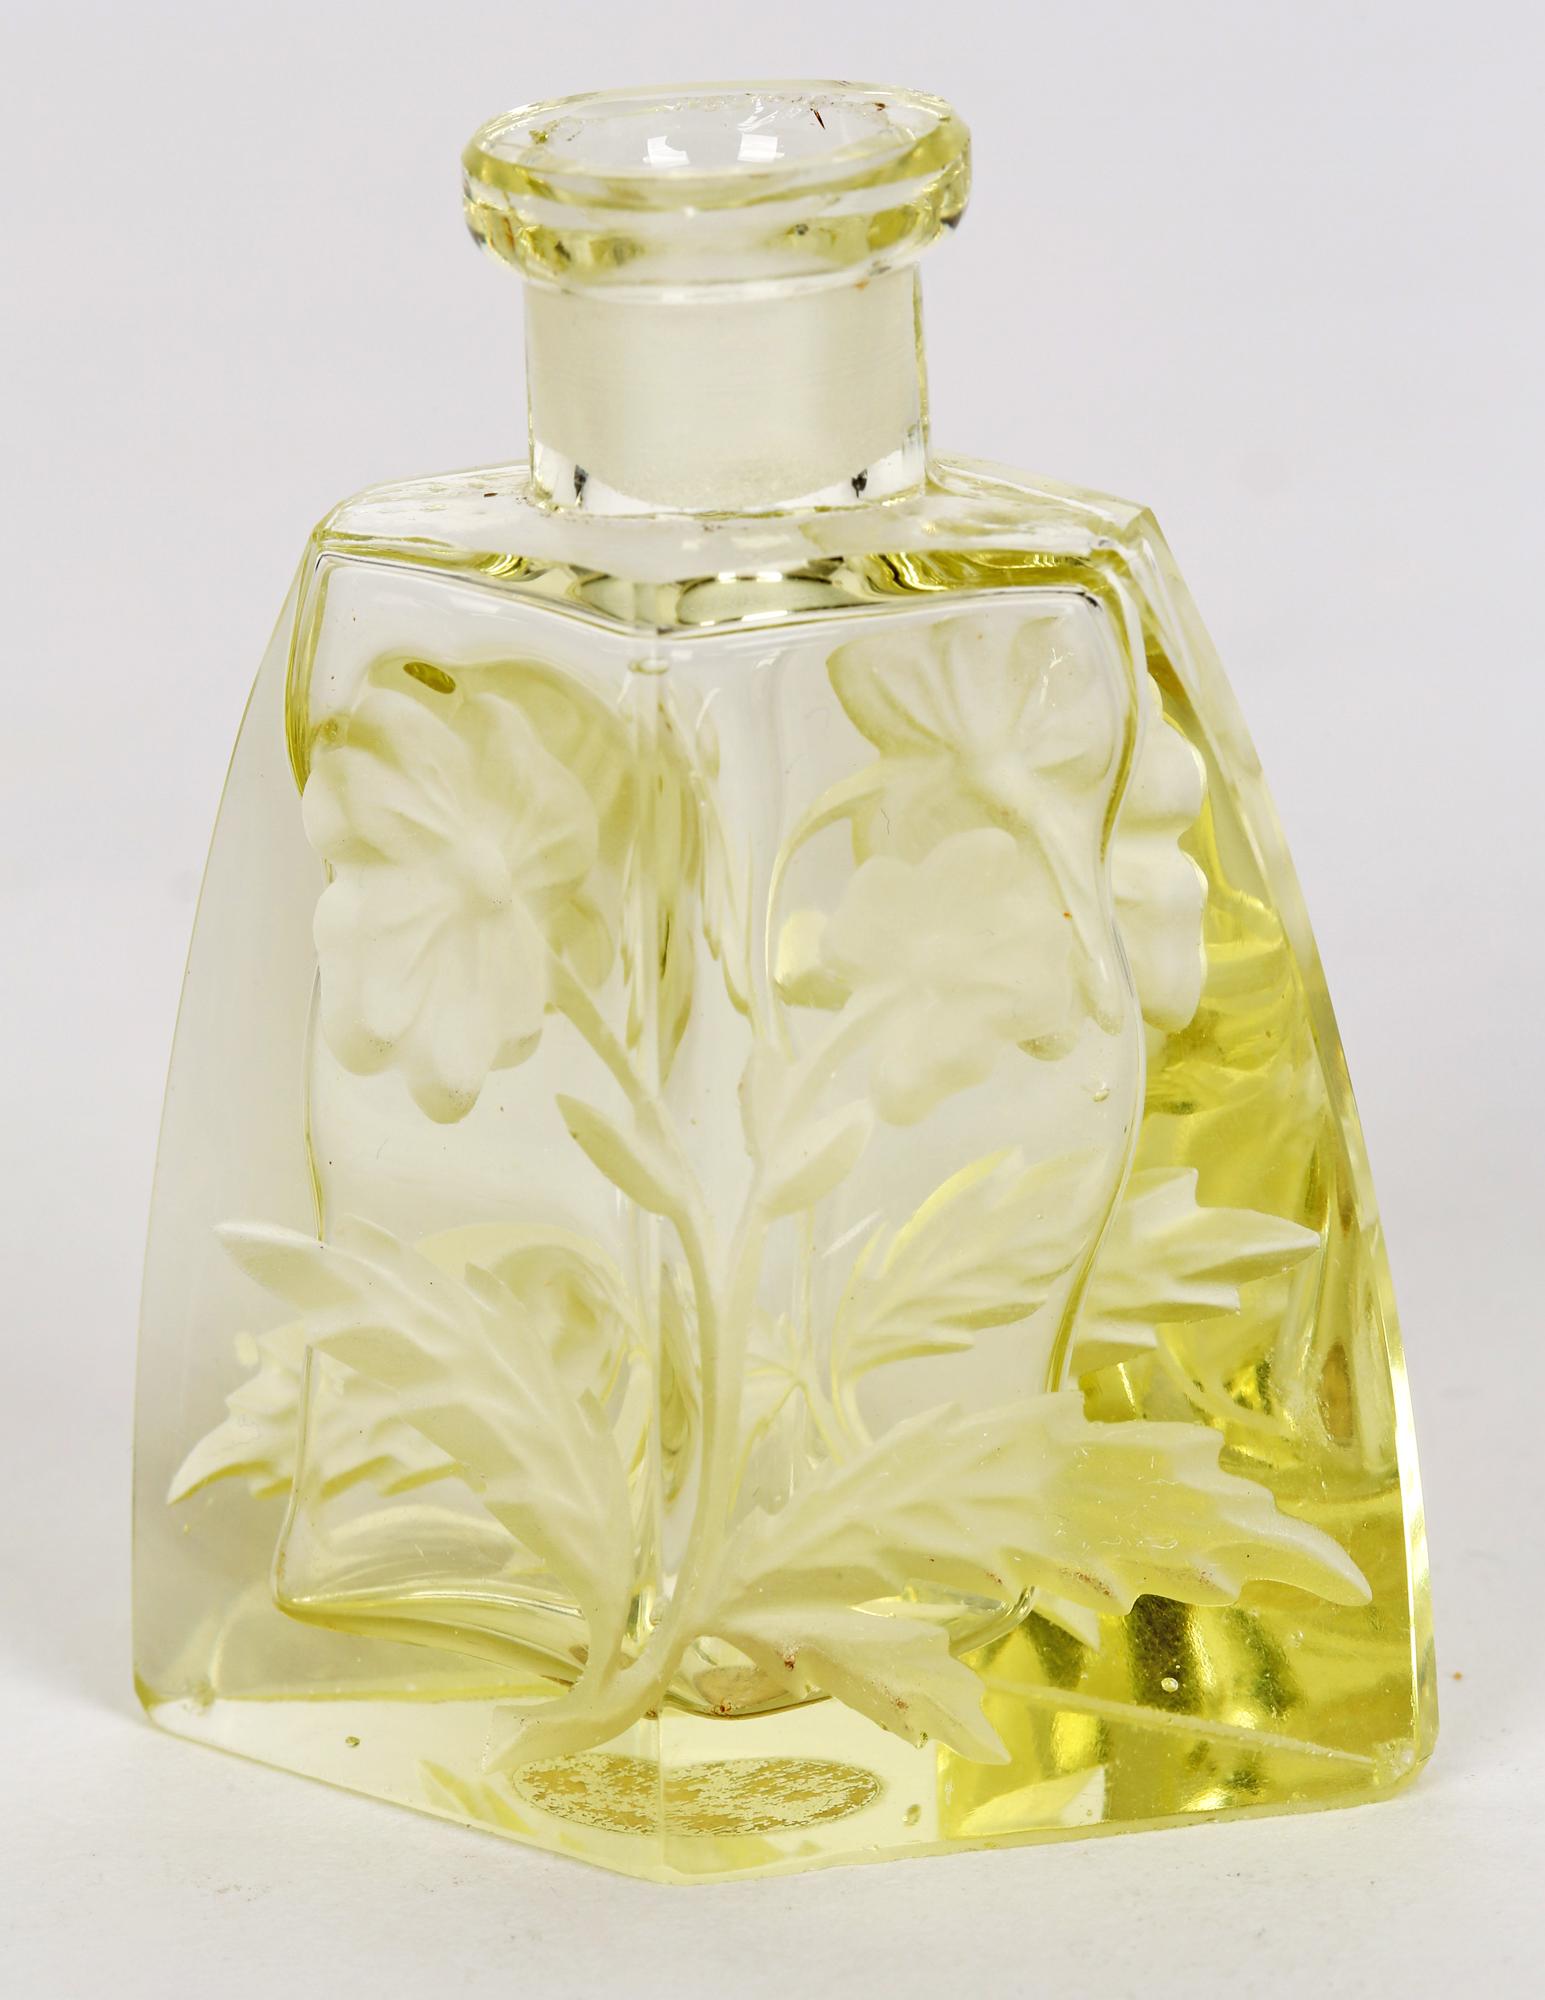 Art Deco Czechoslovakian yellow glass scent bottle with arrow shaped stopper and deeply engraved with floral designs dating from around 1930. This stylish bottle has cut sides and edges and cut stopper the body with engraved and acid etched